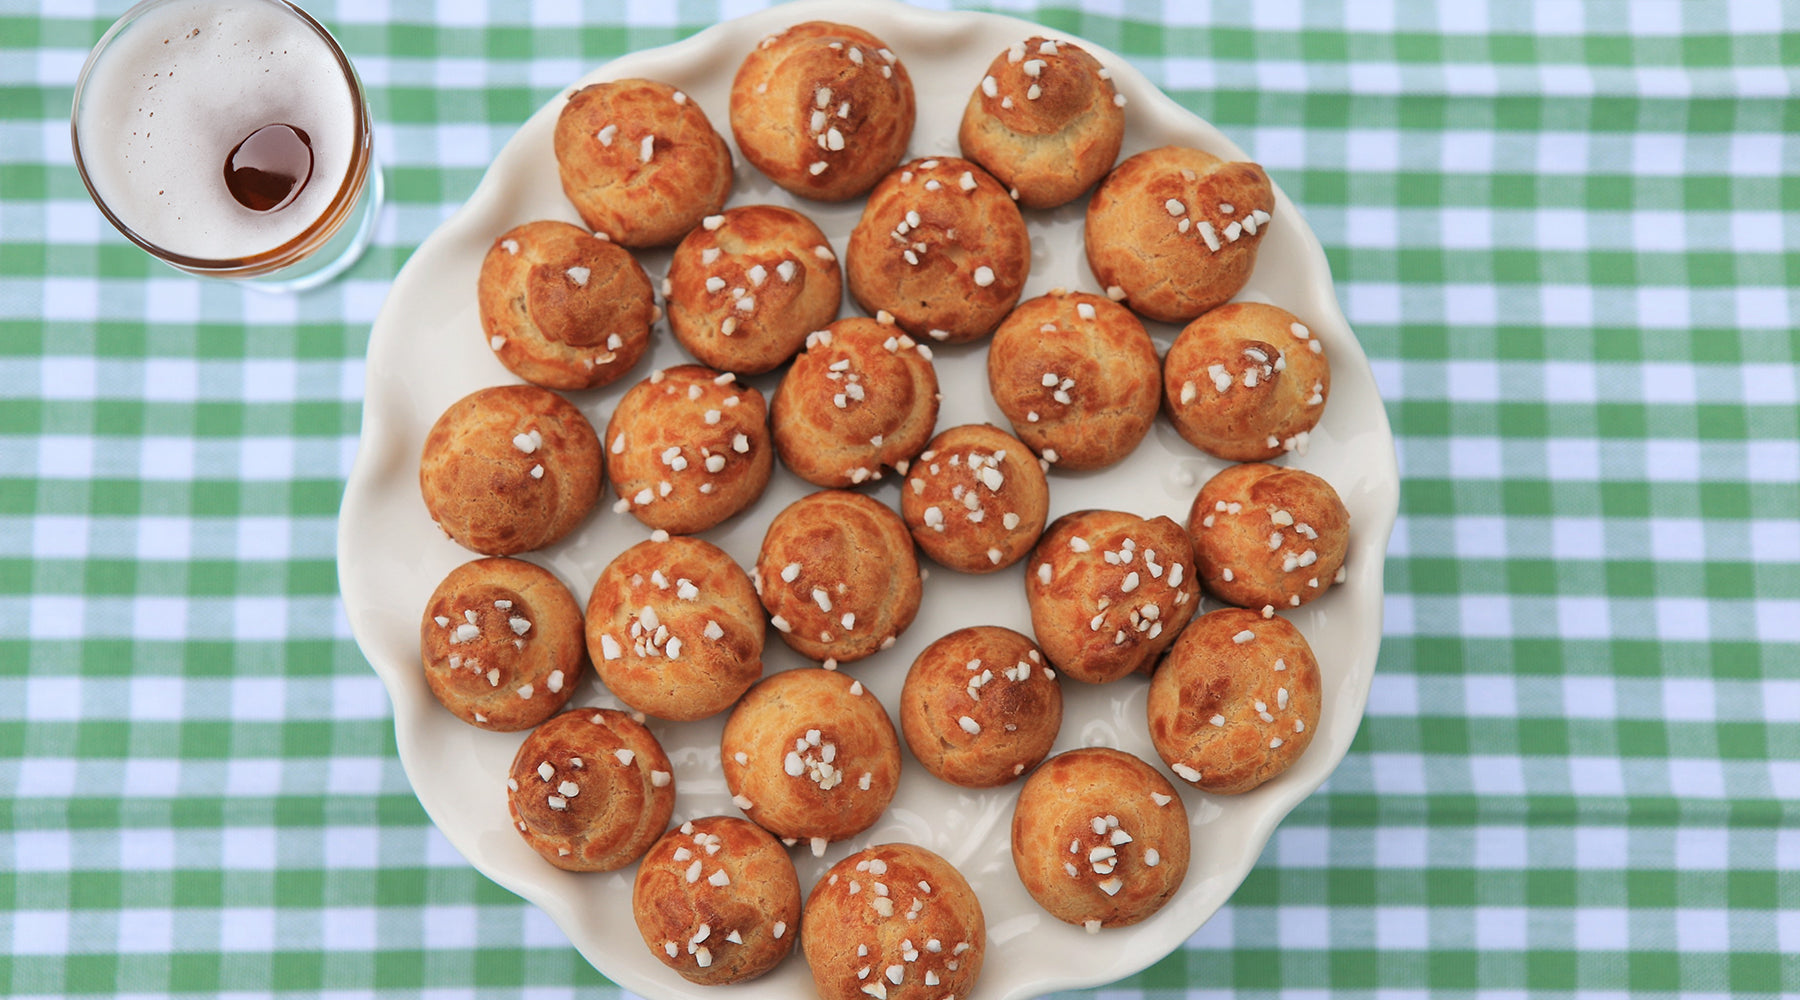 pretzel bites on a plate and a glass of beer to the left of the plate